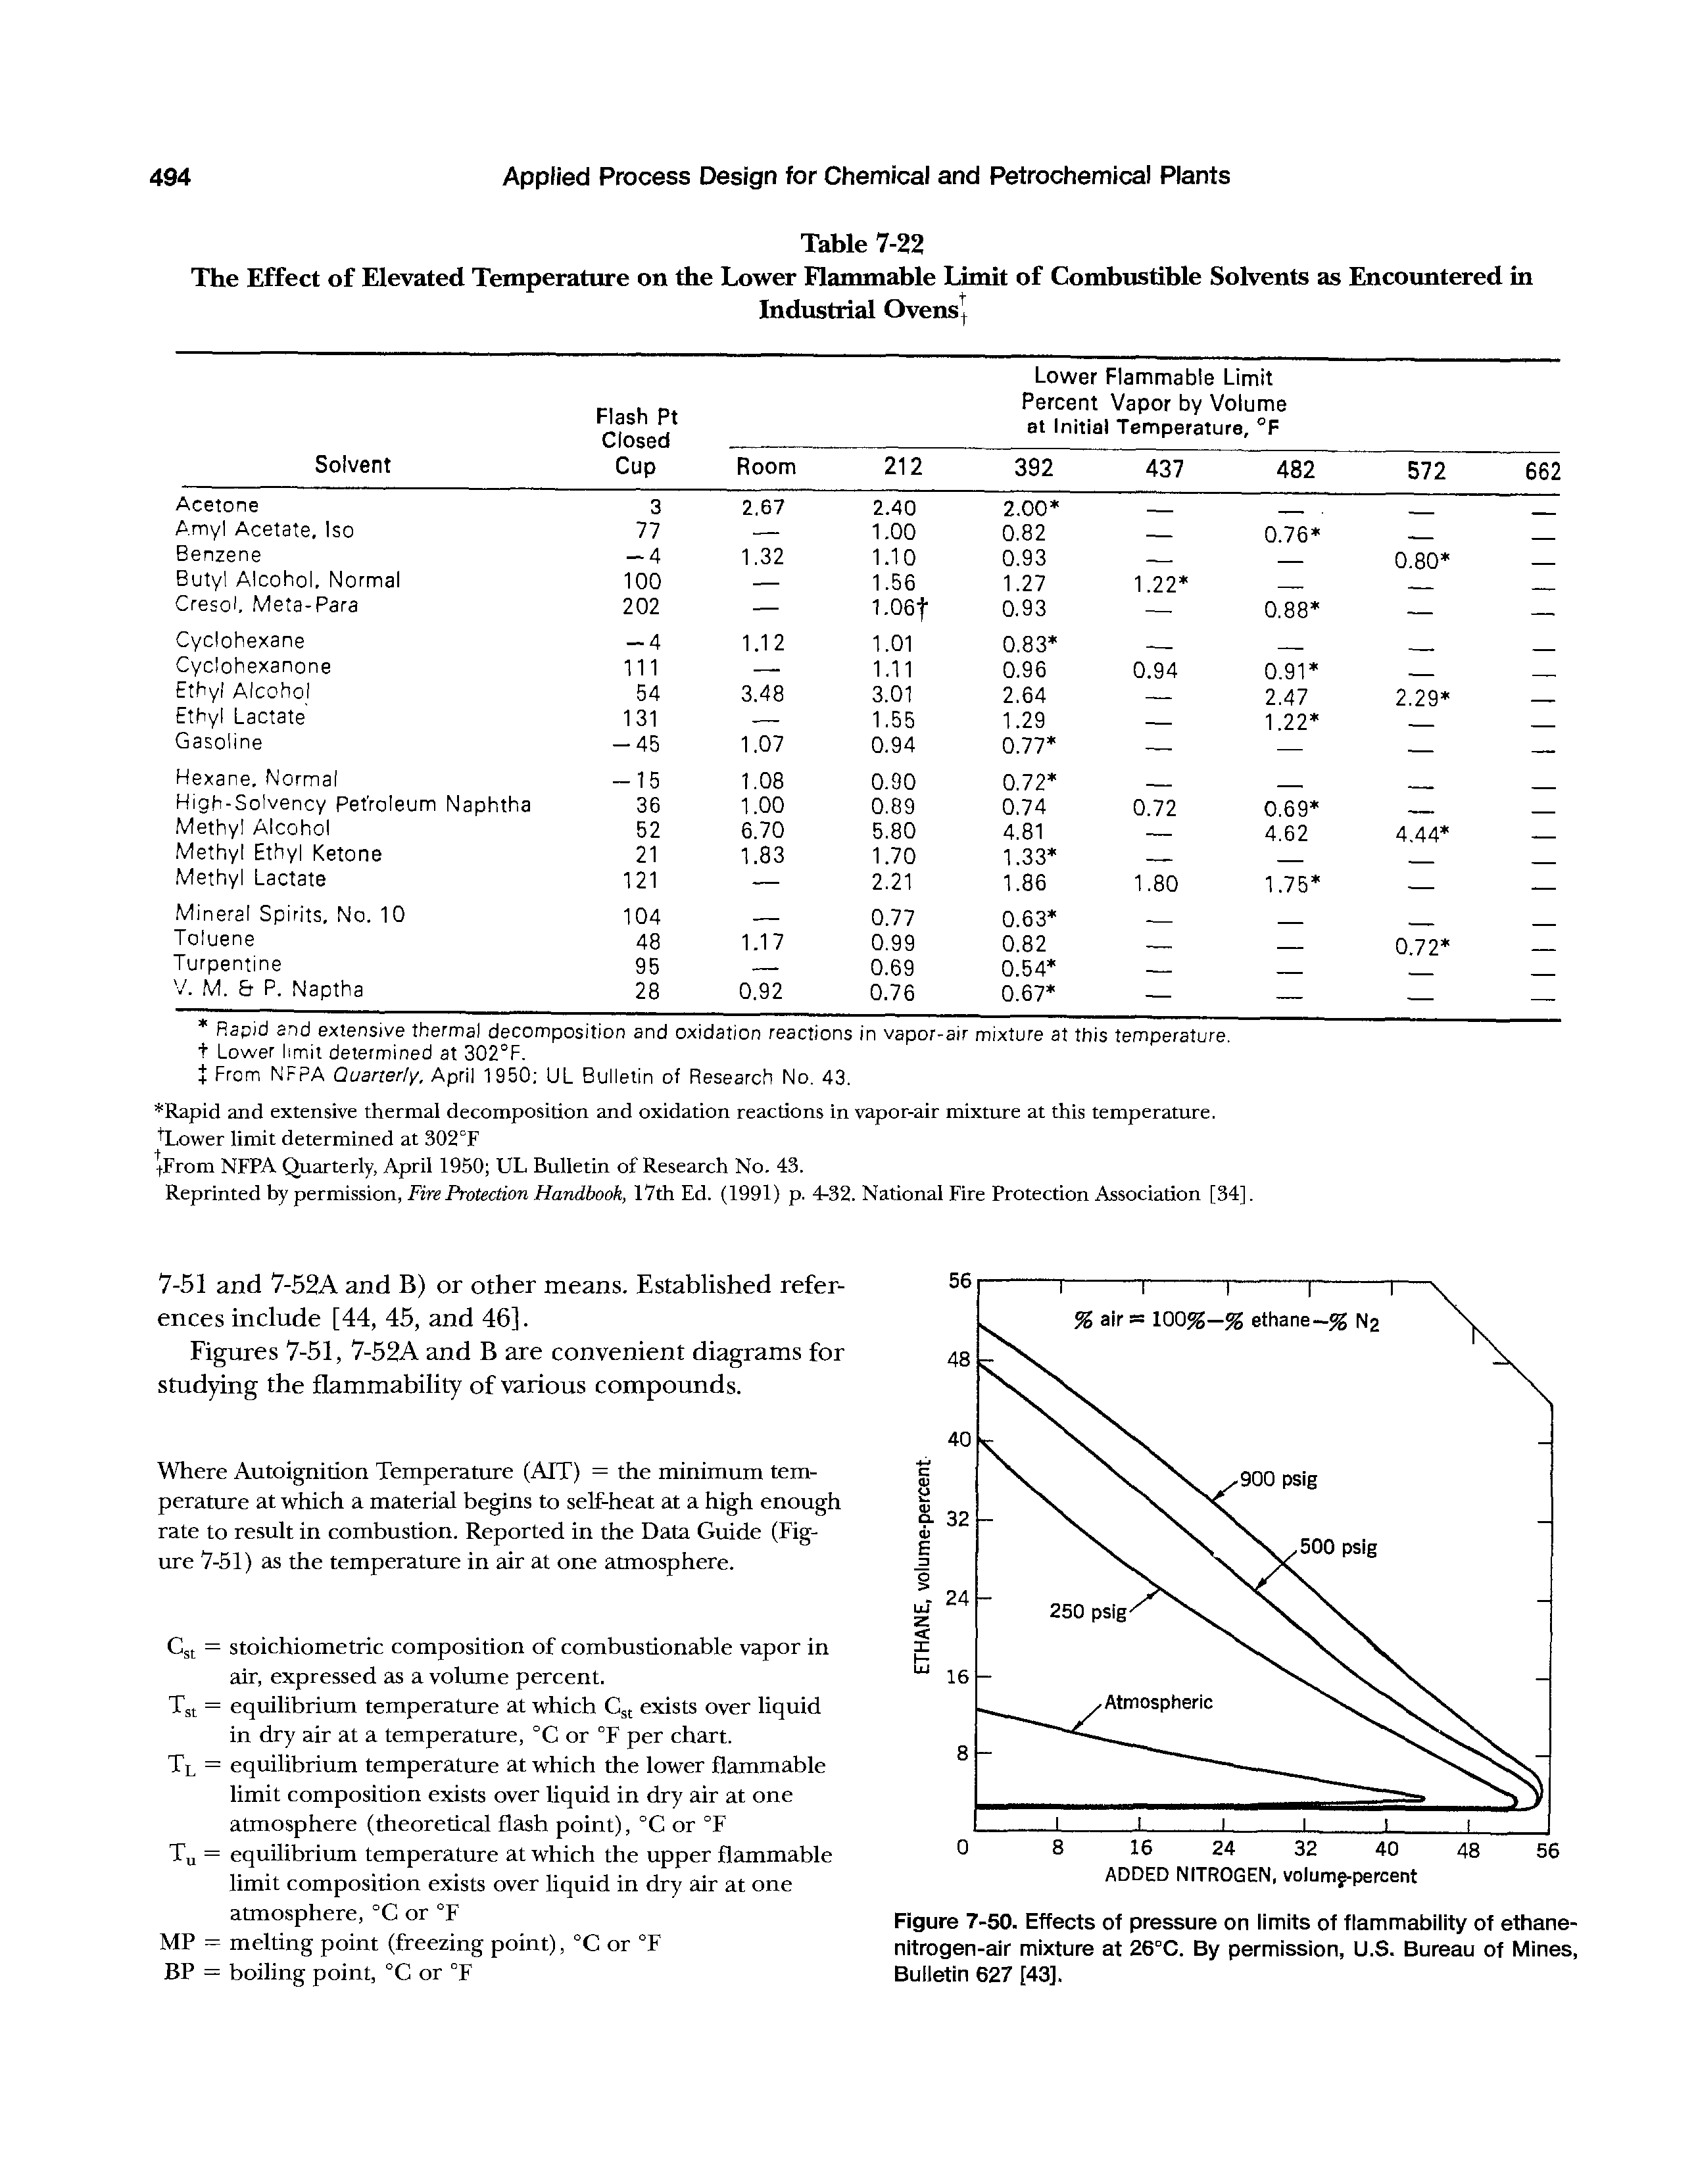 Figure 7-50. Effects of pressure on limits of flammability of ethane-nitrogen-air mixture at 26°C. By permission, U.S. Bureau of Mines, Bulletin 627 [43],...